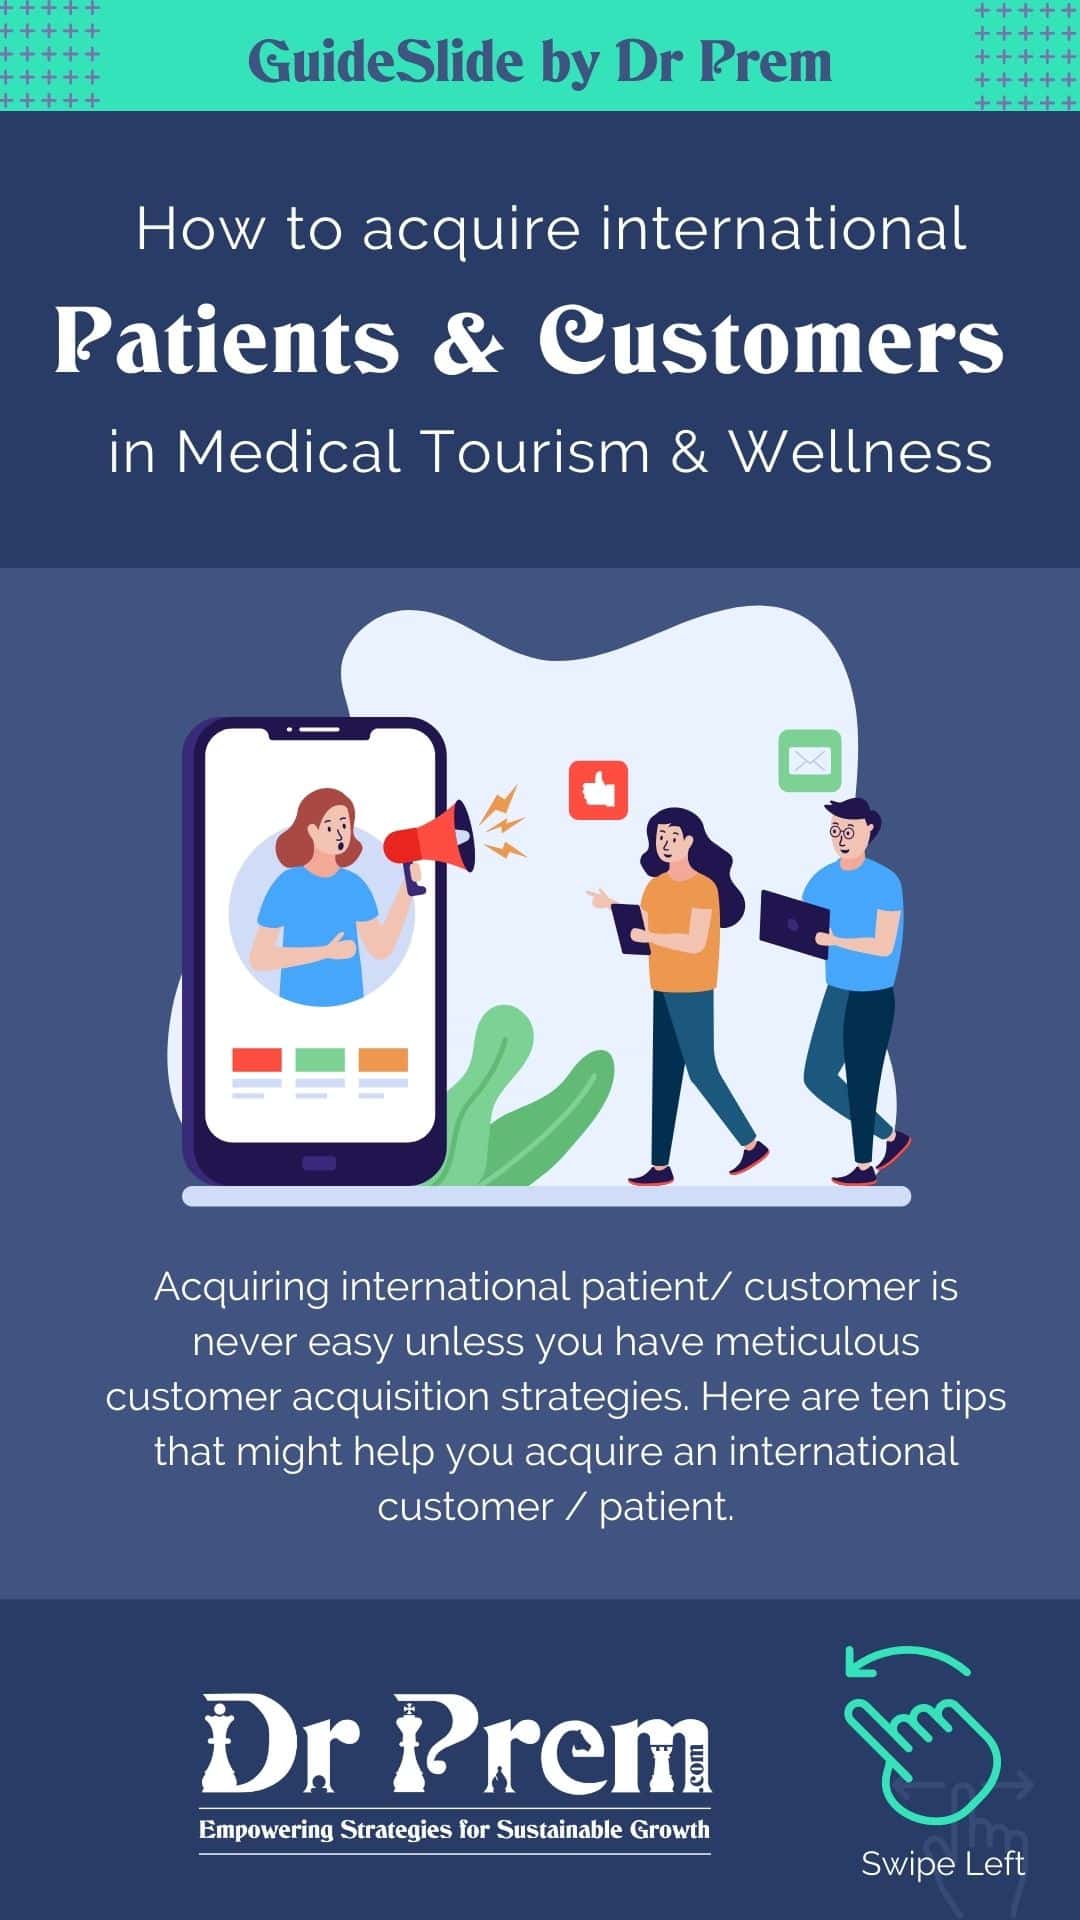 Acquire international Patients in Medical Tourism